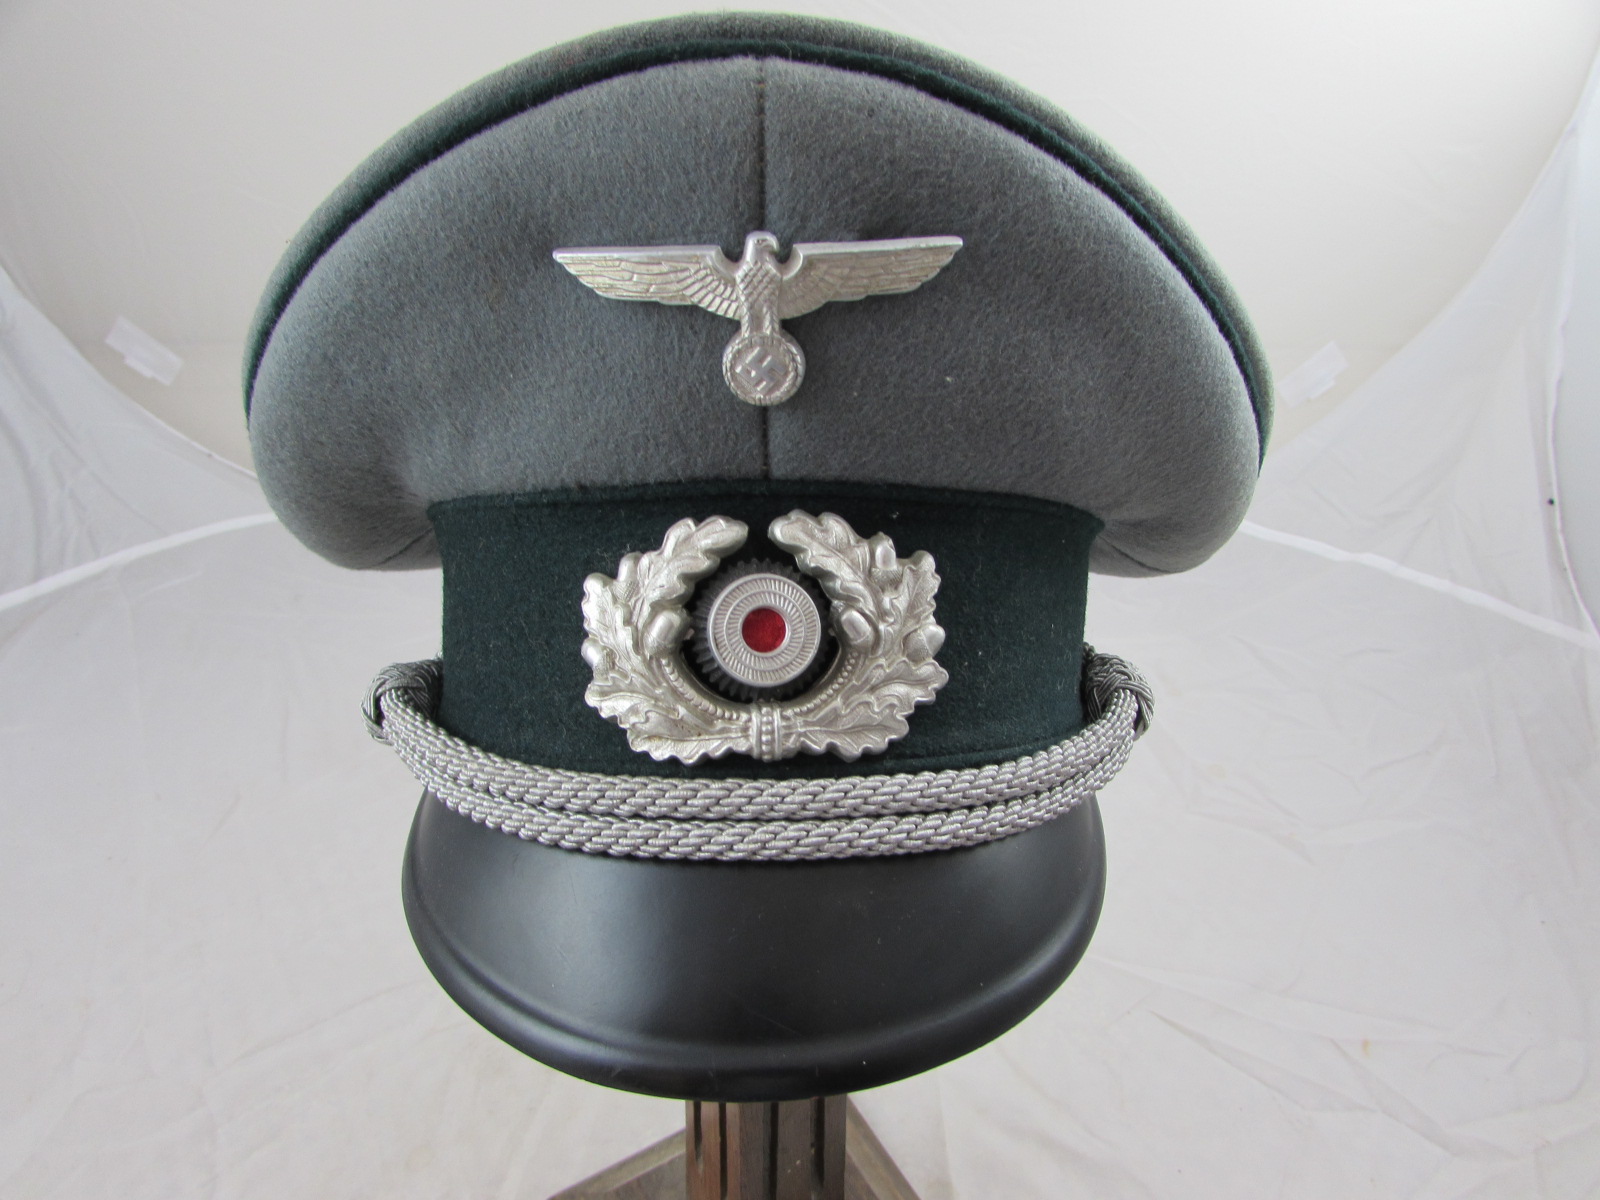 WW2 German Army Administration Officer's Peaked Cap (original)